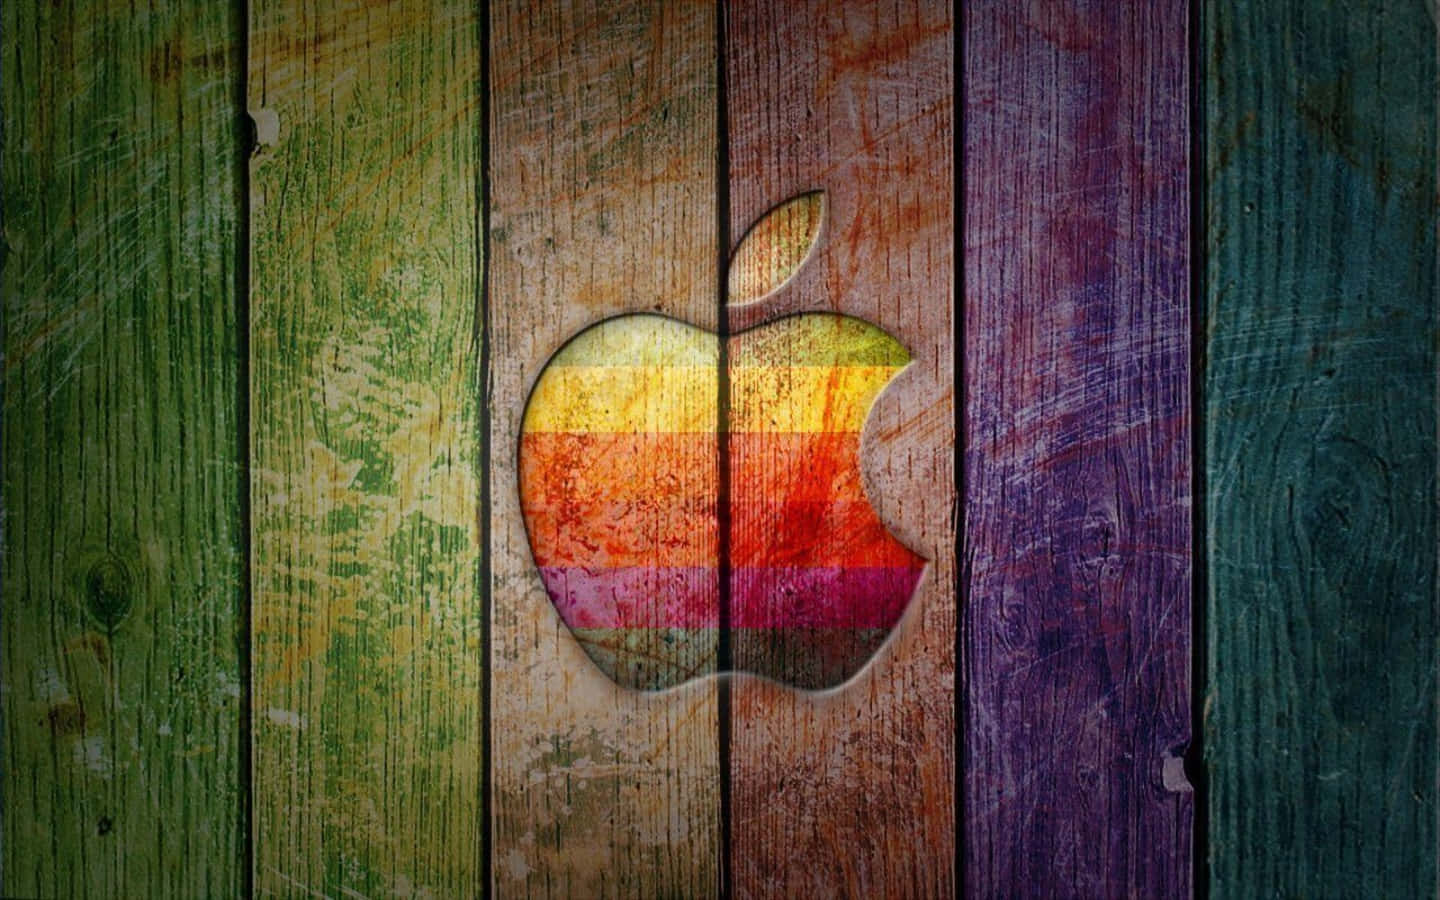 "Taste the Difference of Best Apple, Inc." Wallpaper